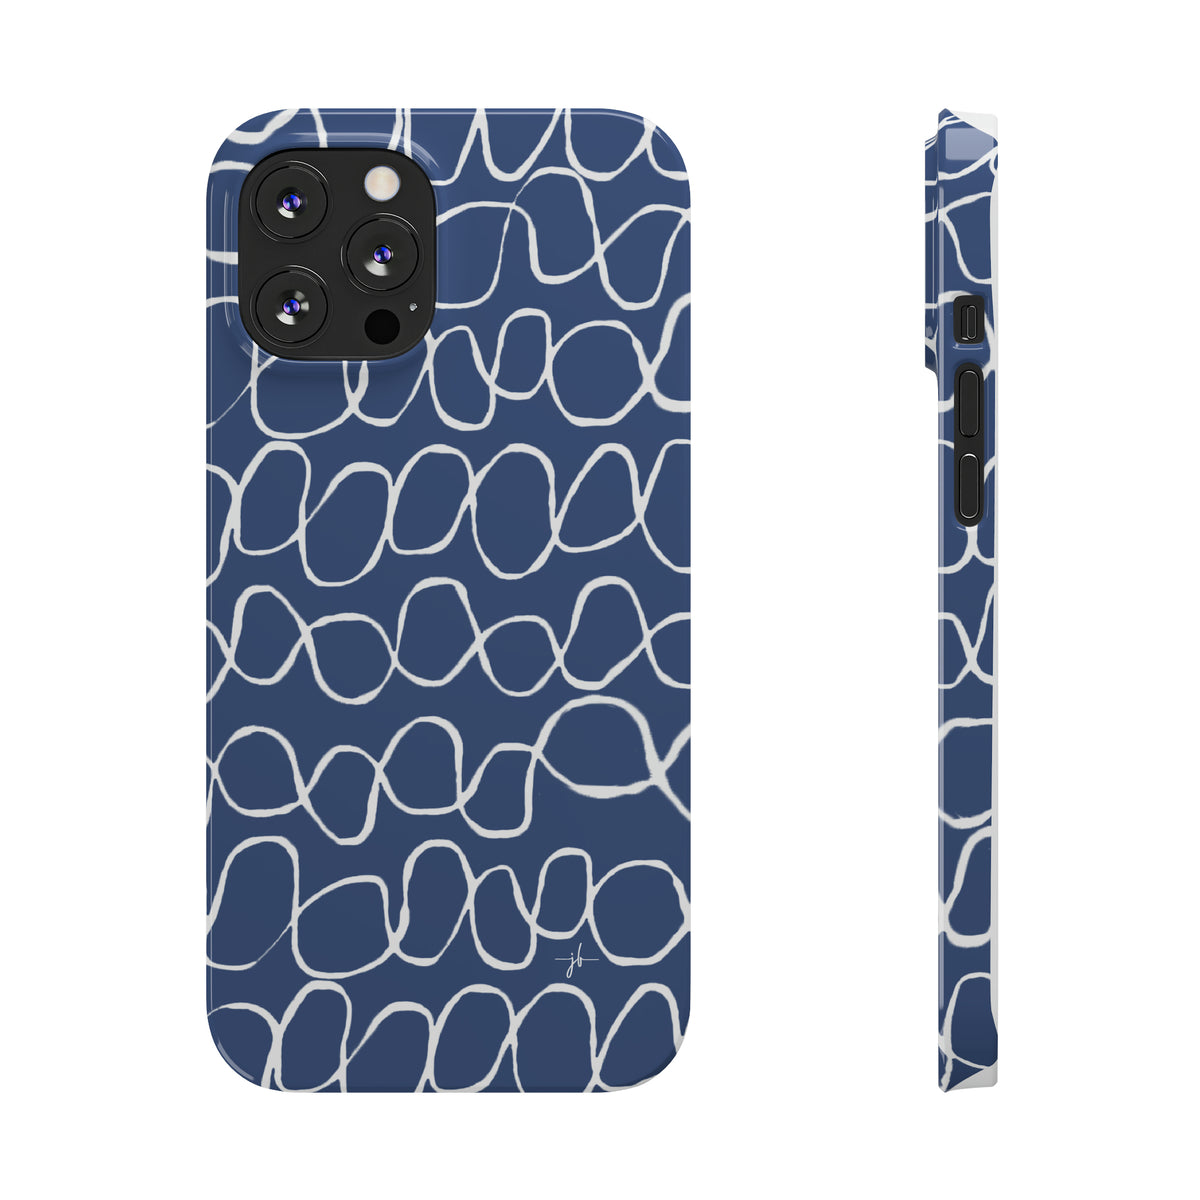 blue iPhone case shown from the front and side with white hand-drawn infinity stripes